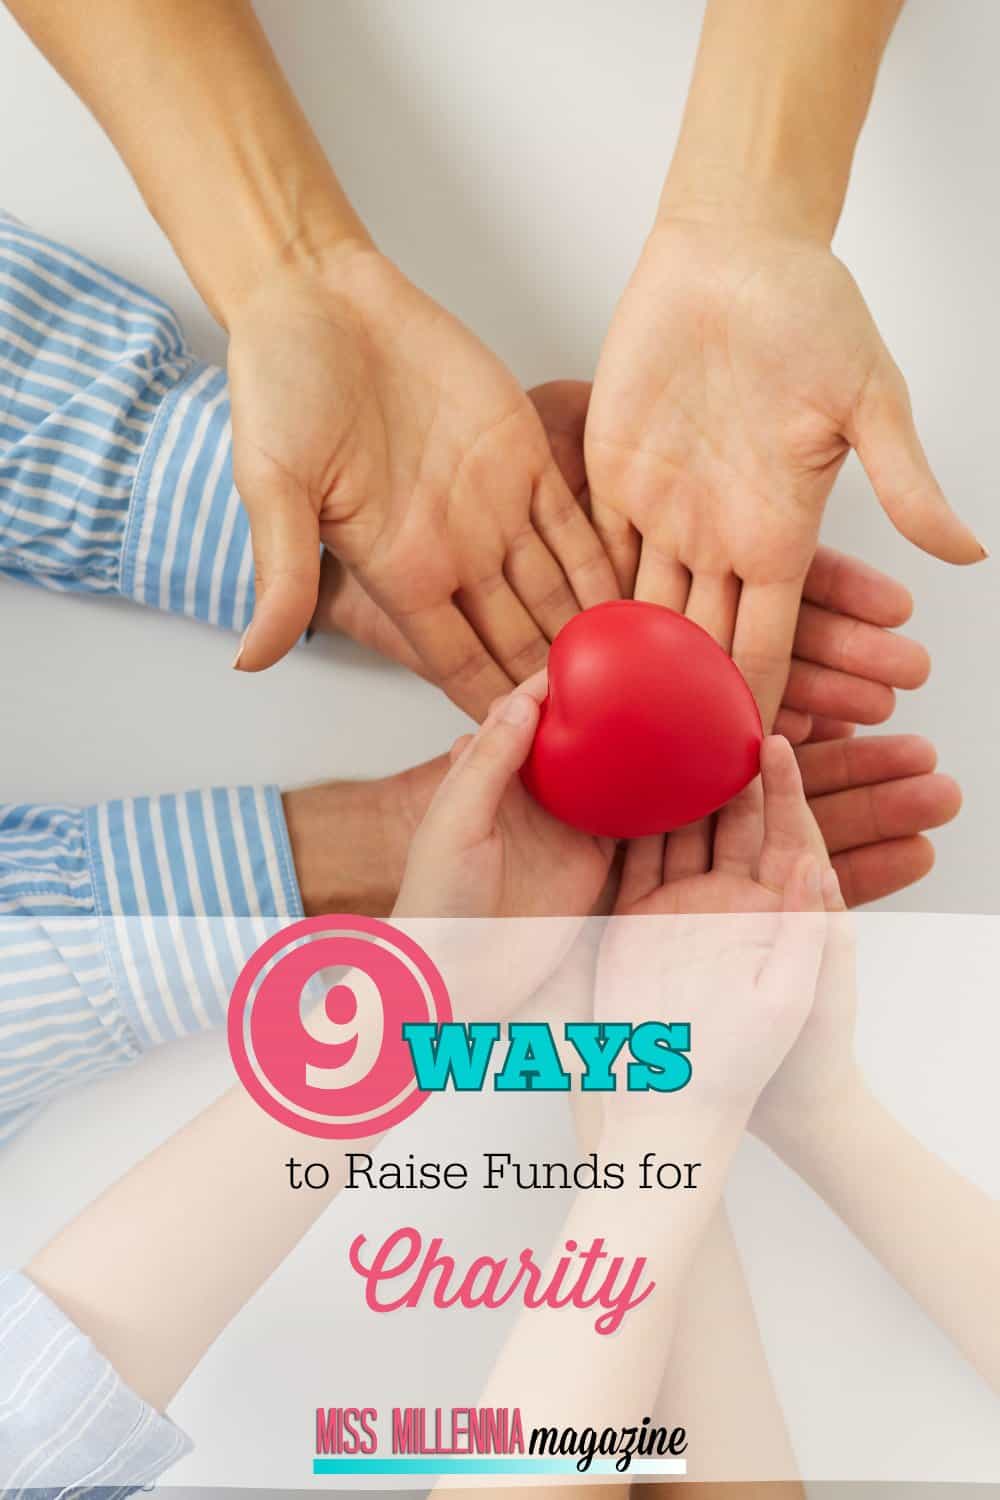 9 Top Ways to Raise Funds for Charity